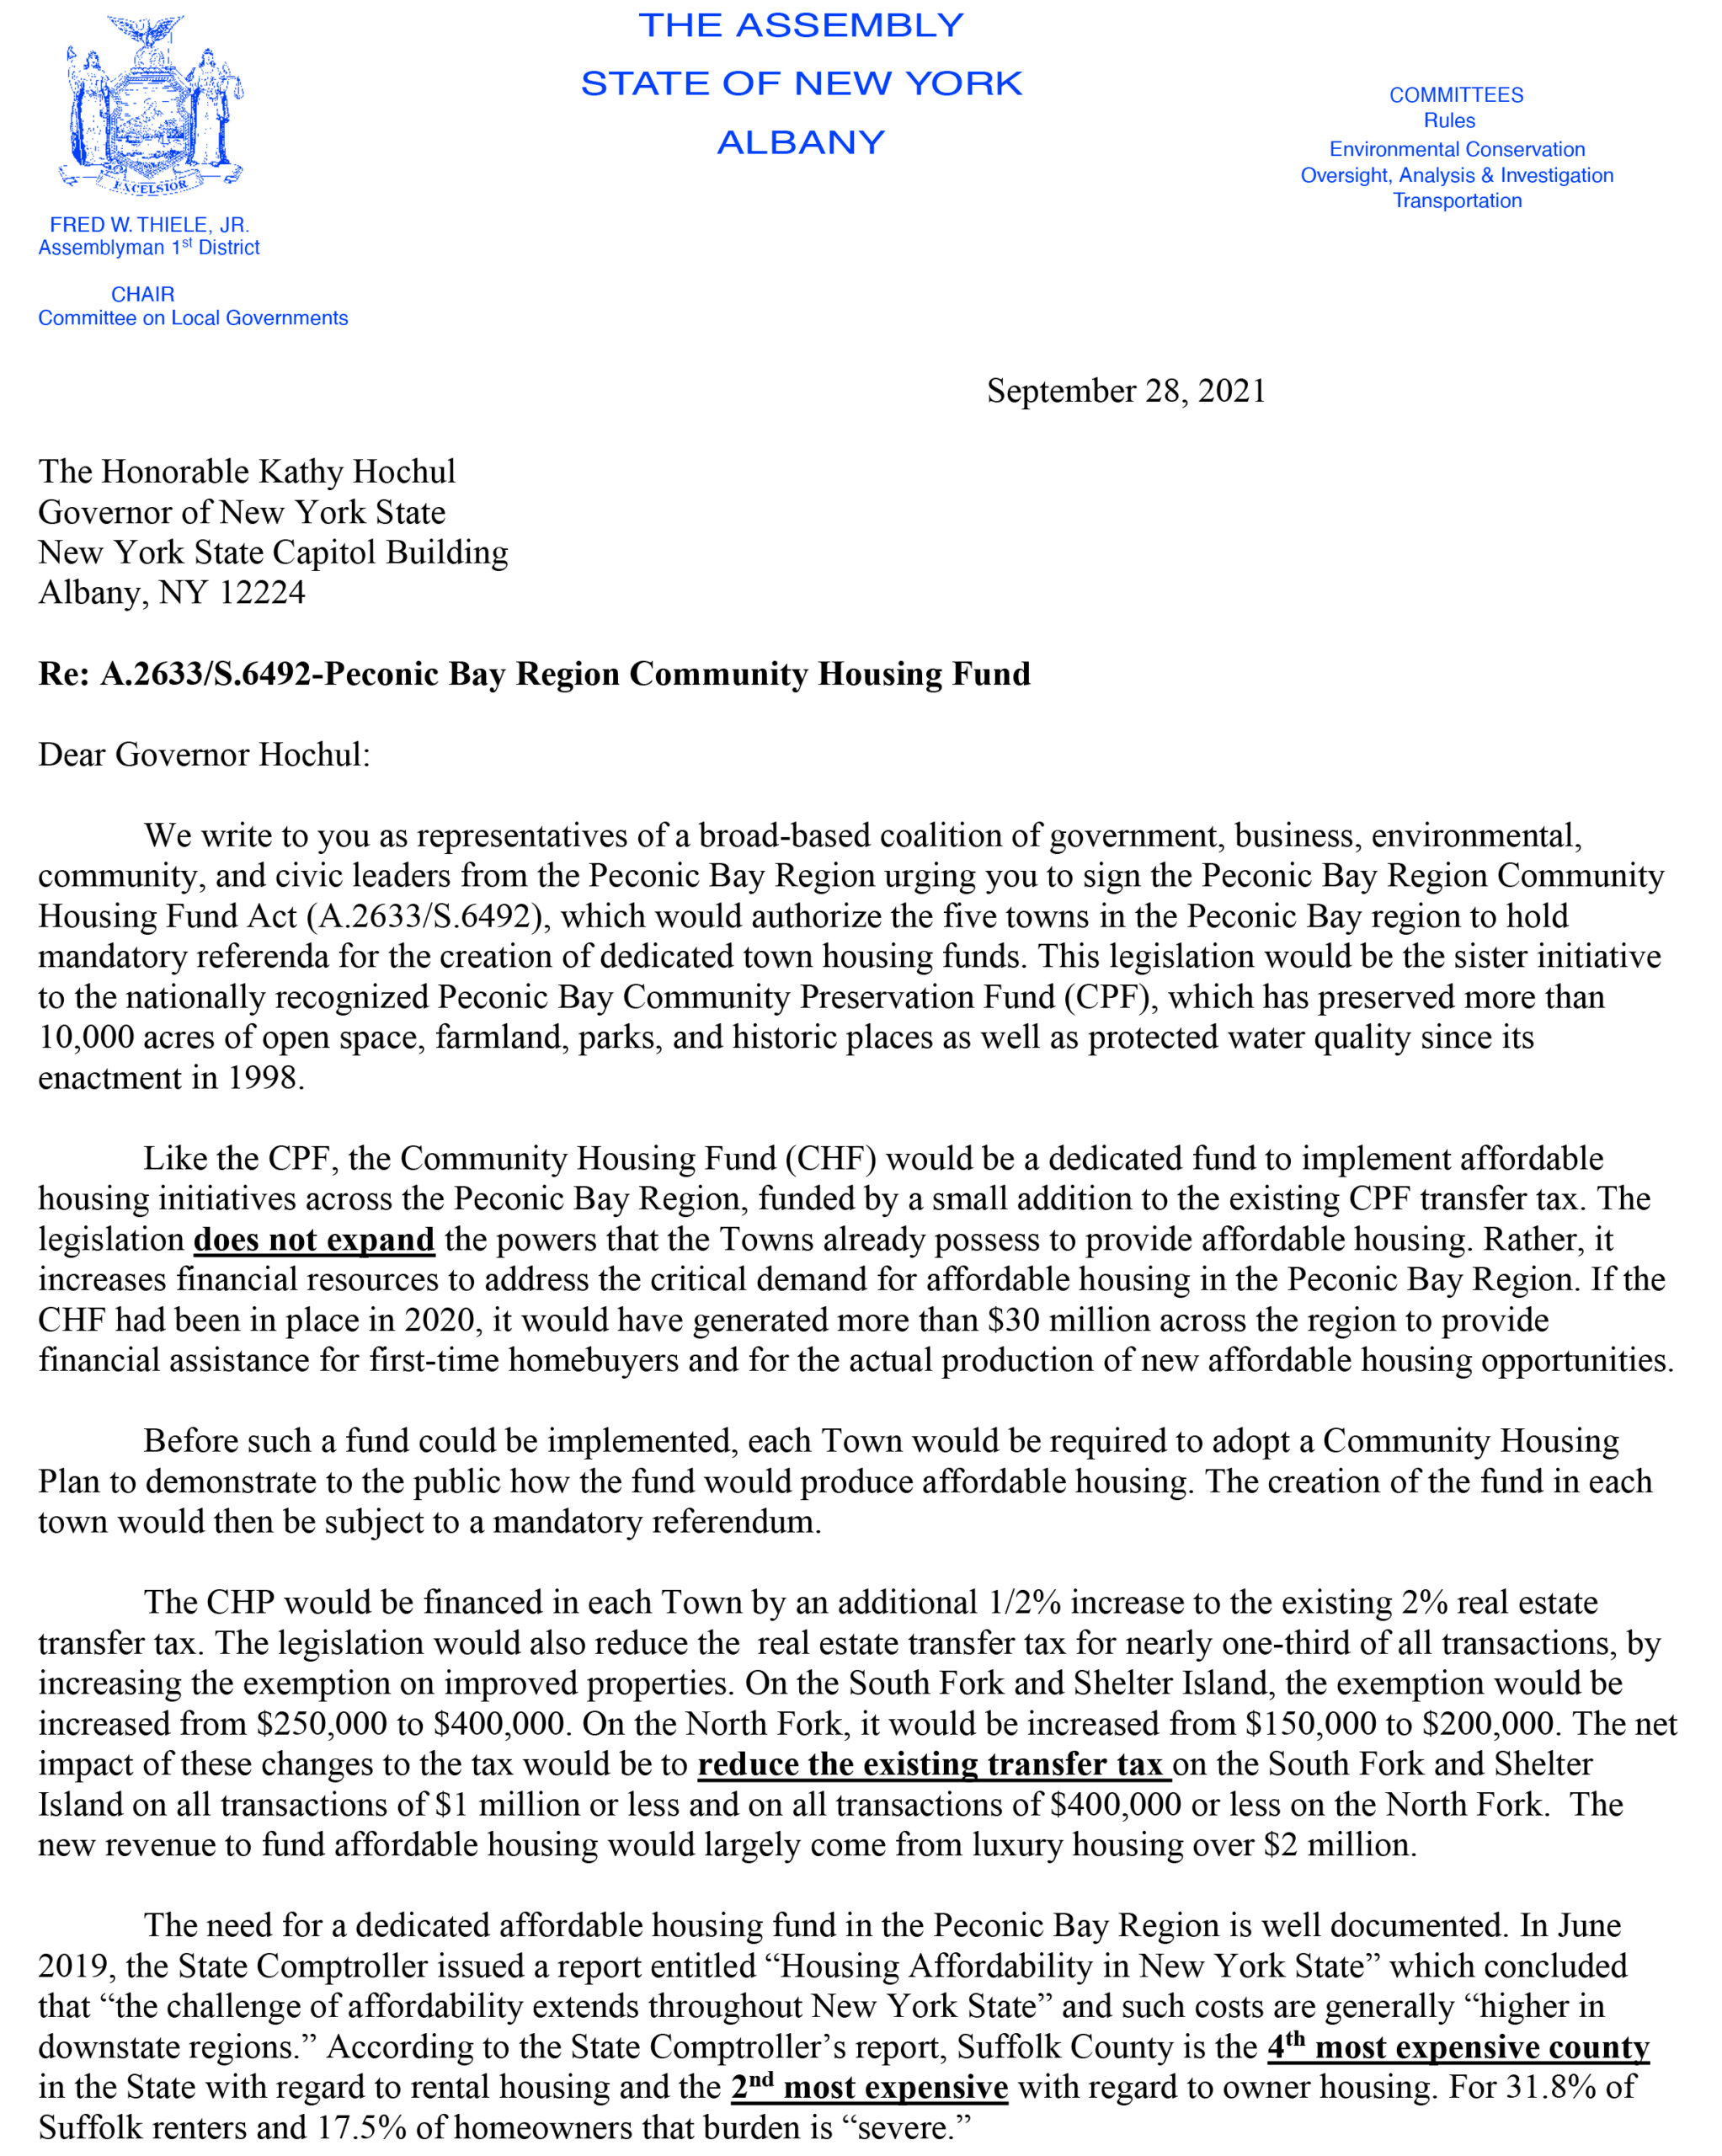 A.2633 Community Housing Fund letter to Governor Hochul from NY State Assemblyman Fred Thiele's office to further affordable housing goals in the region